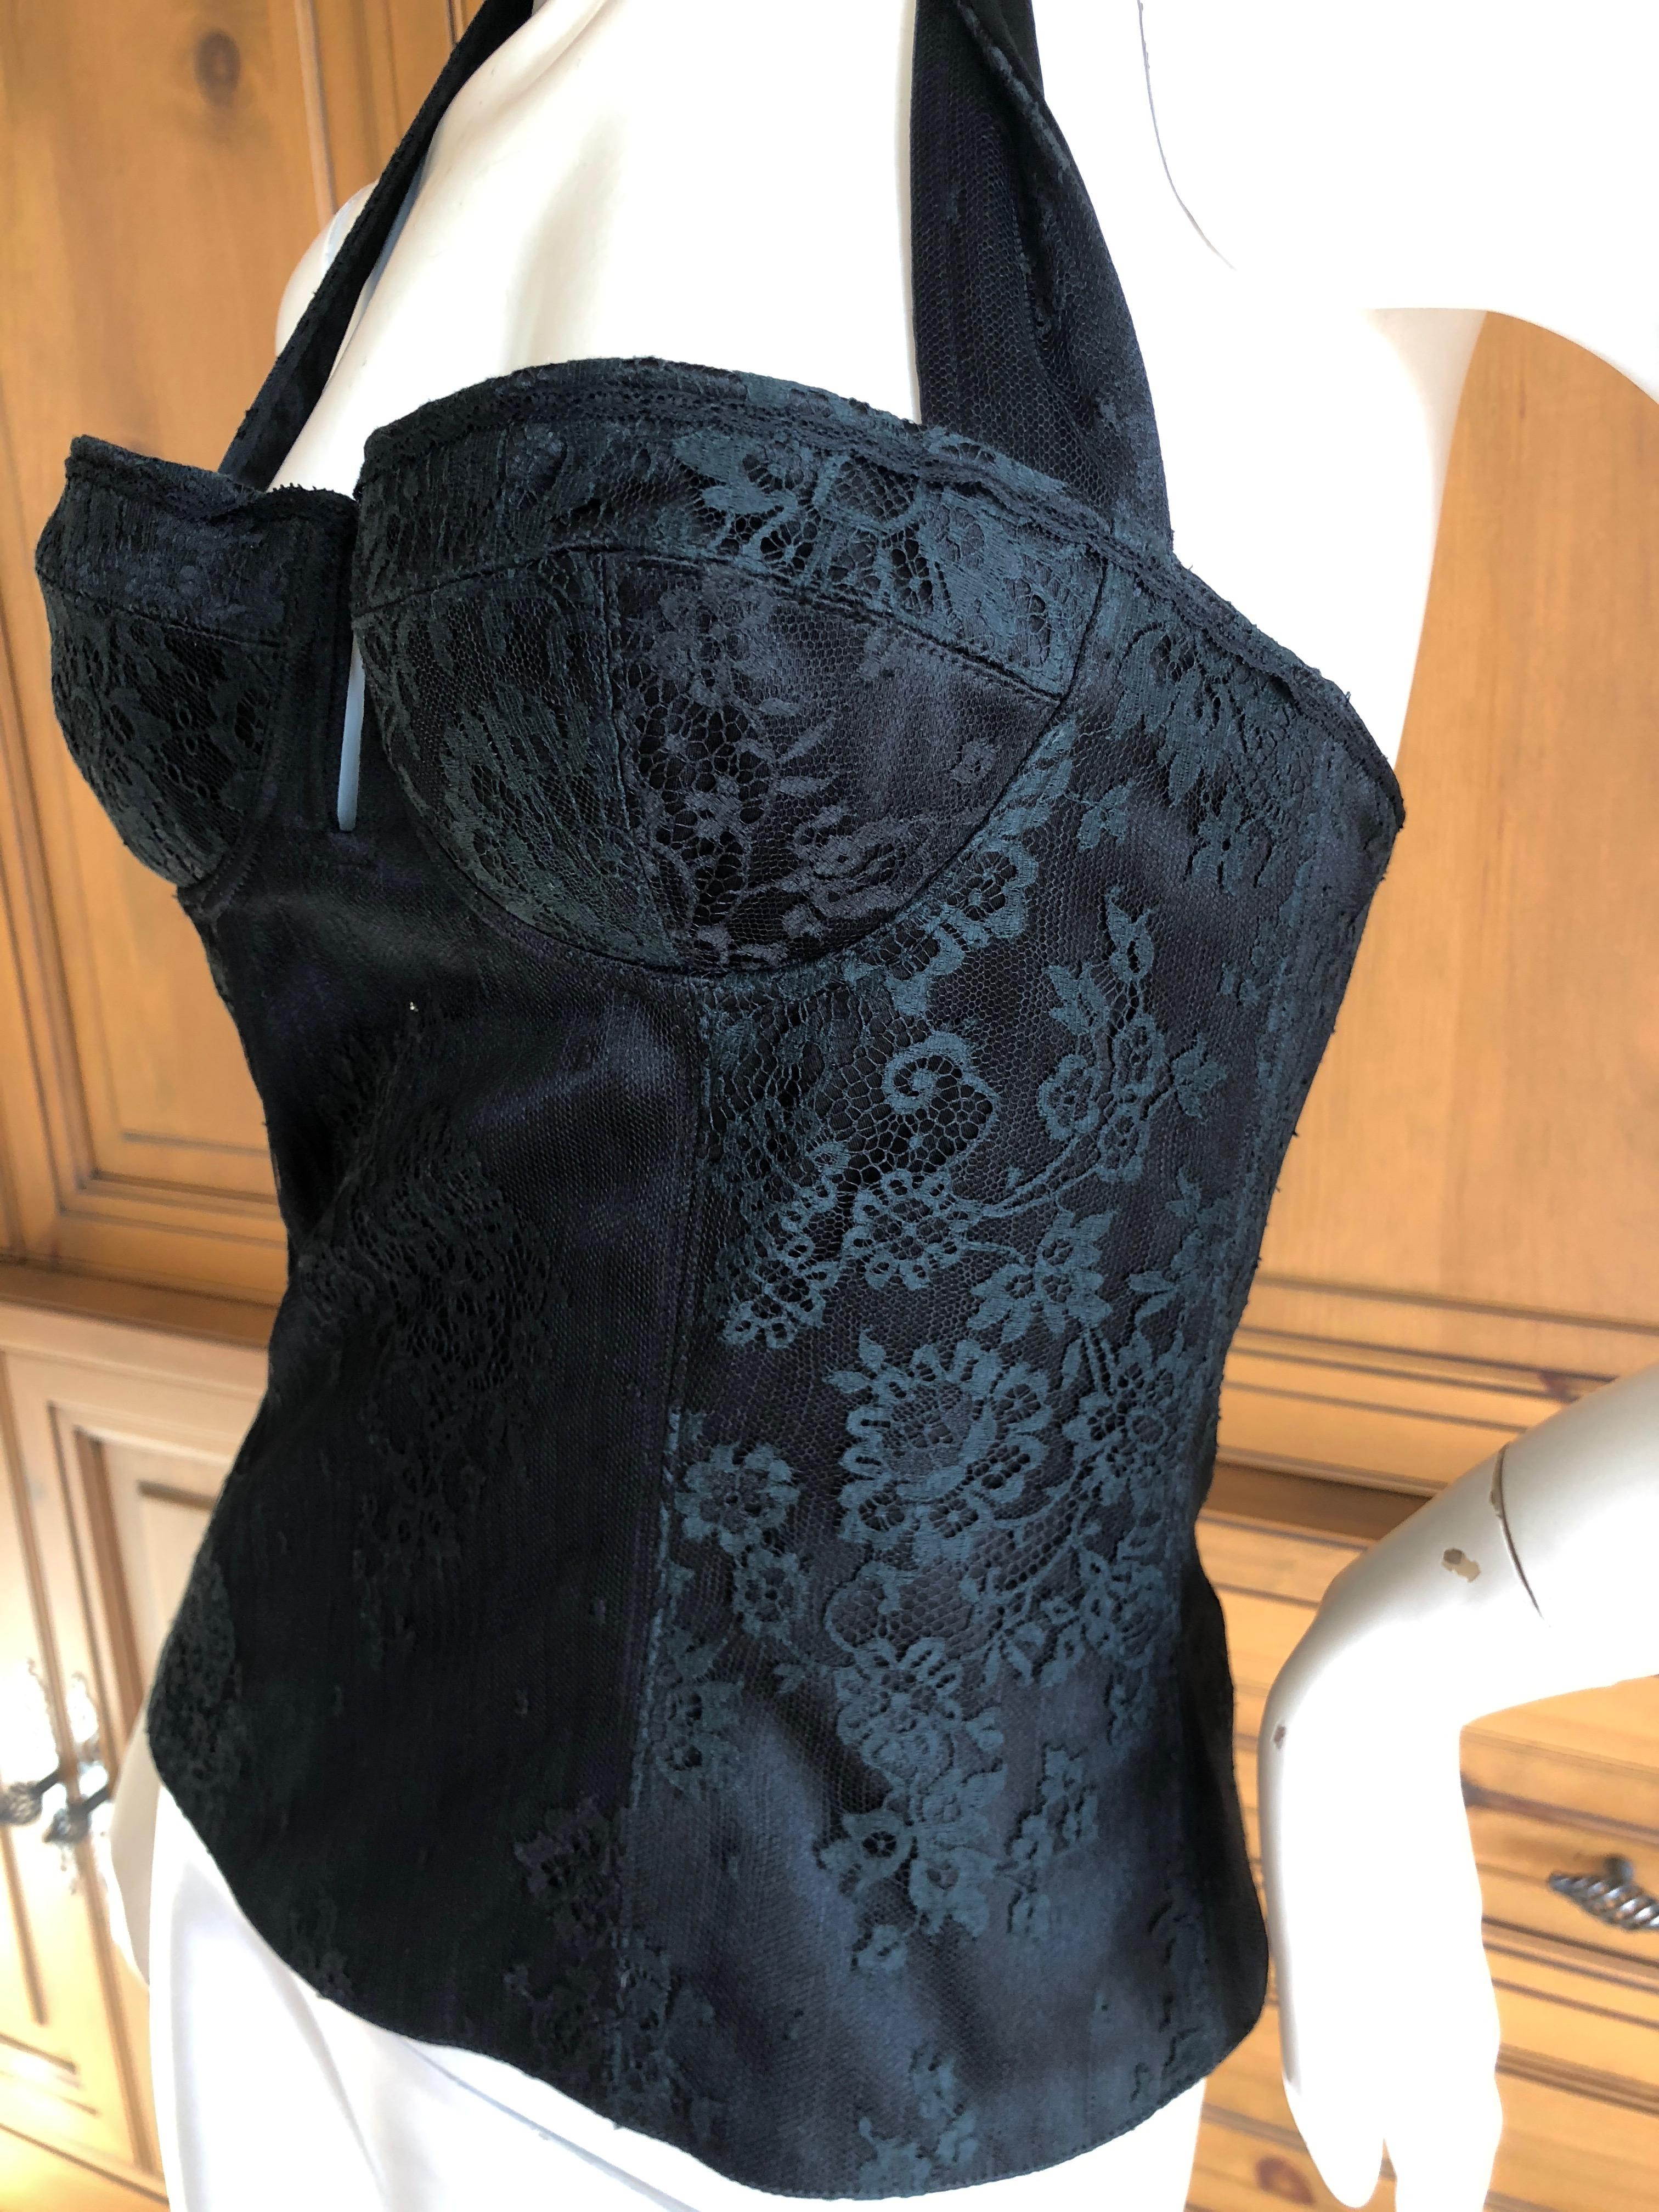 Christian Dior by John Galliano Vintage Black Lace Corset NWT Size 38 For Sale 1